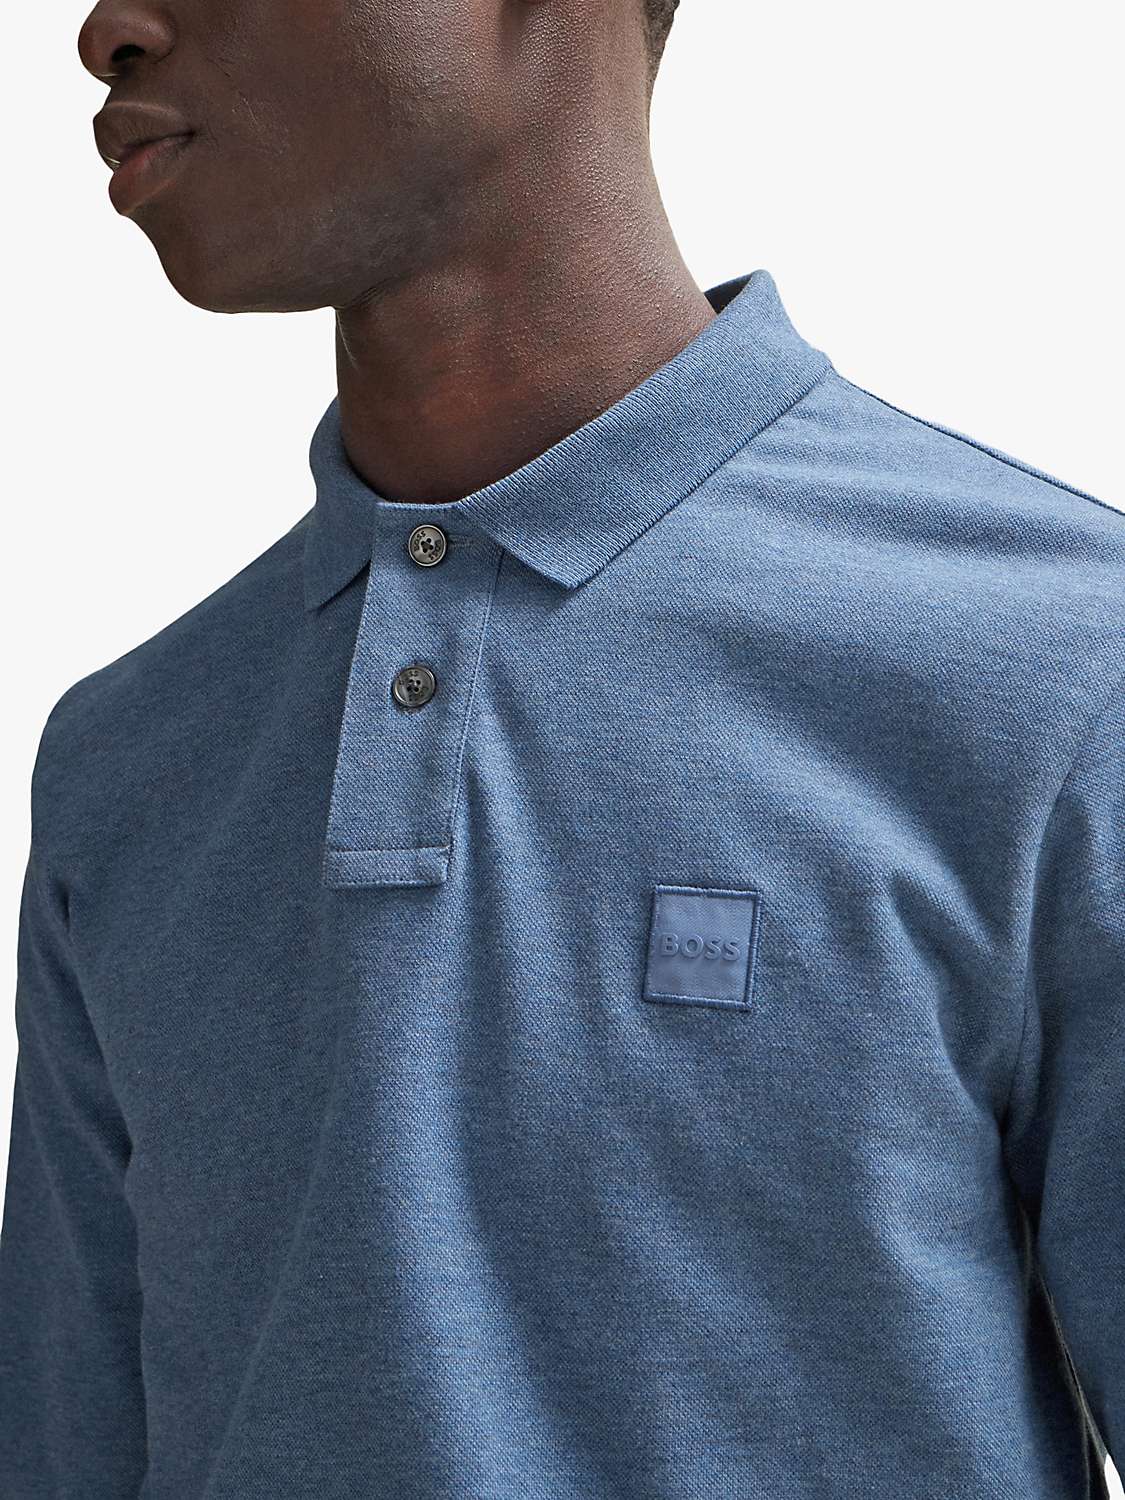 Buy BOSS Passerby Long Sleeve Polo Shirt, Blue Online at johnlewis.com